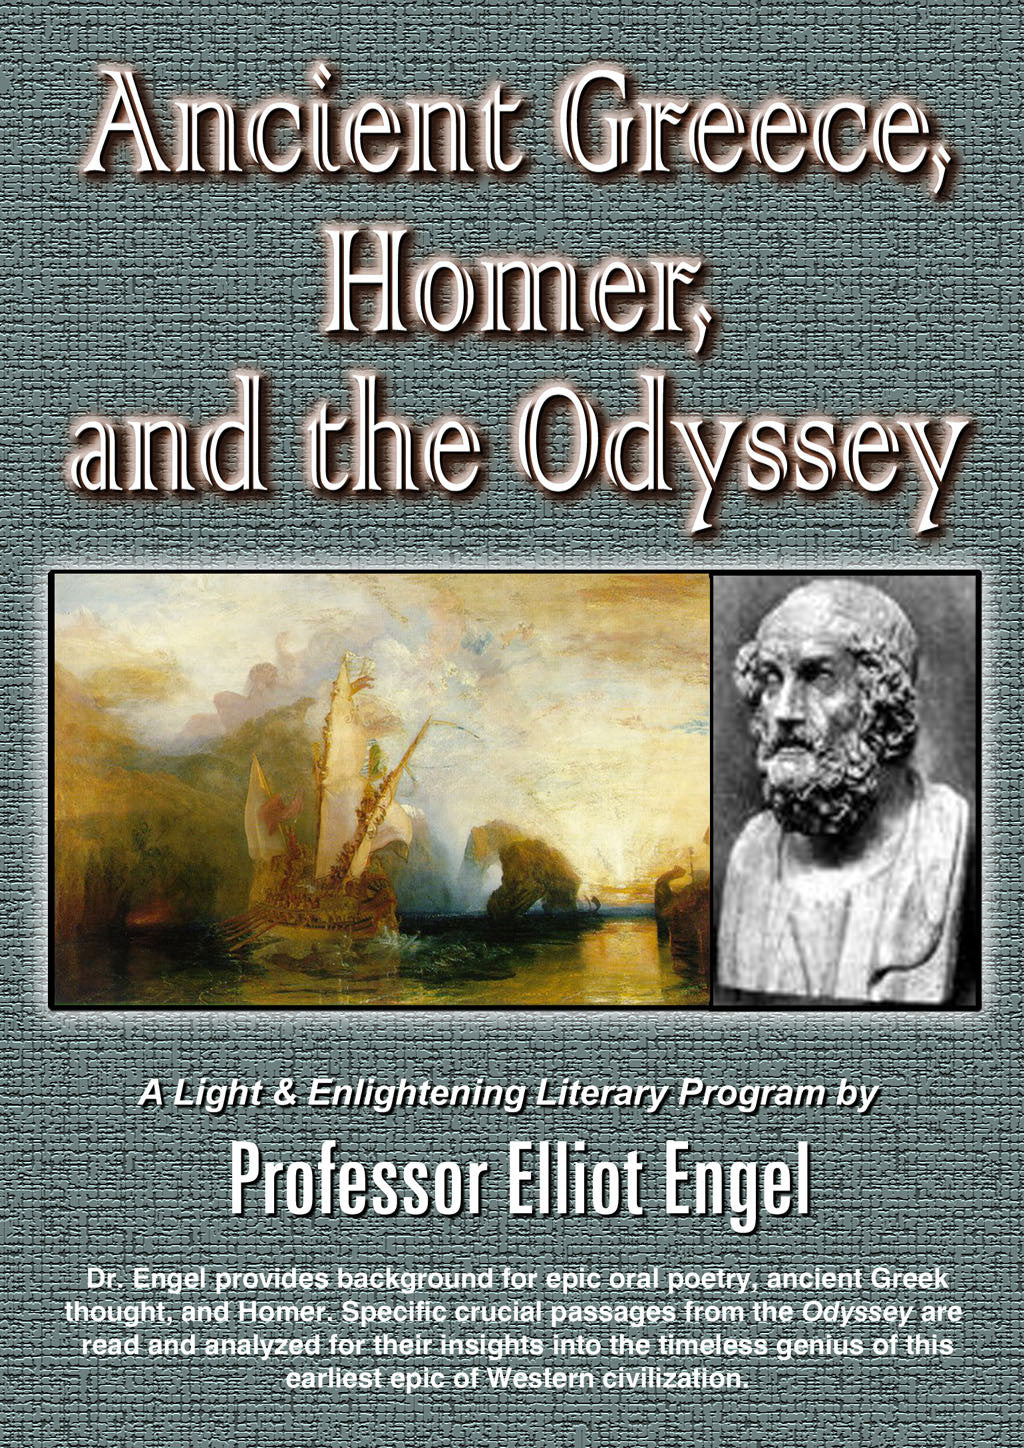 Ancient Greece, Homer, and the Odyssey